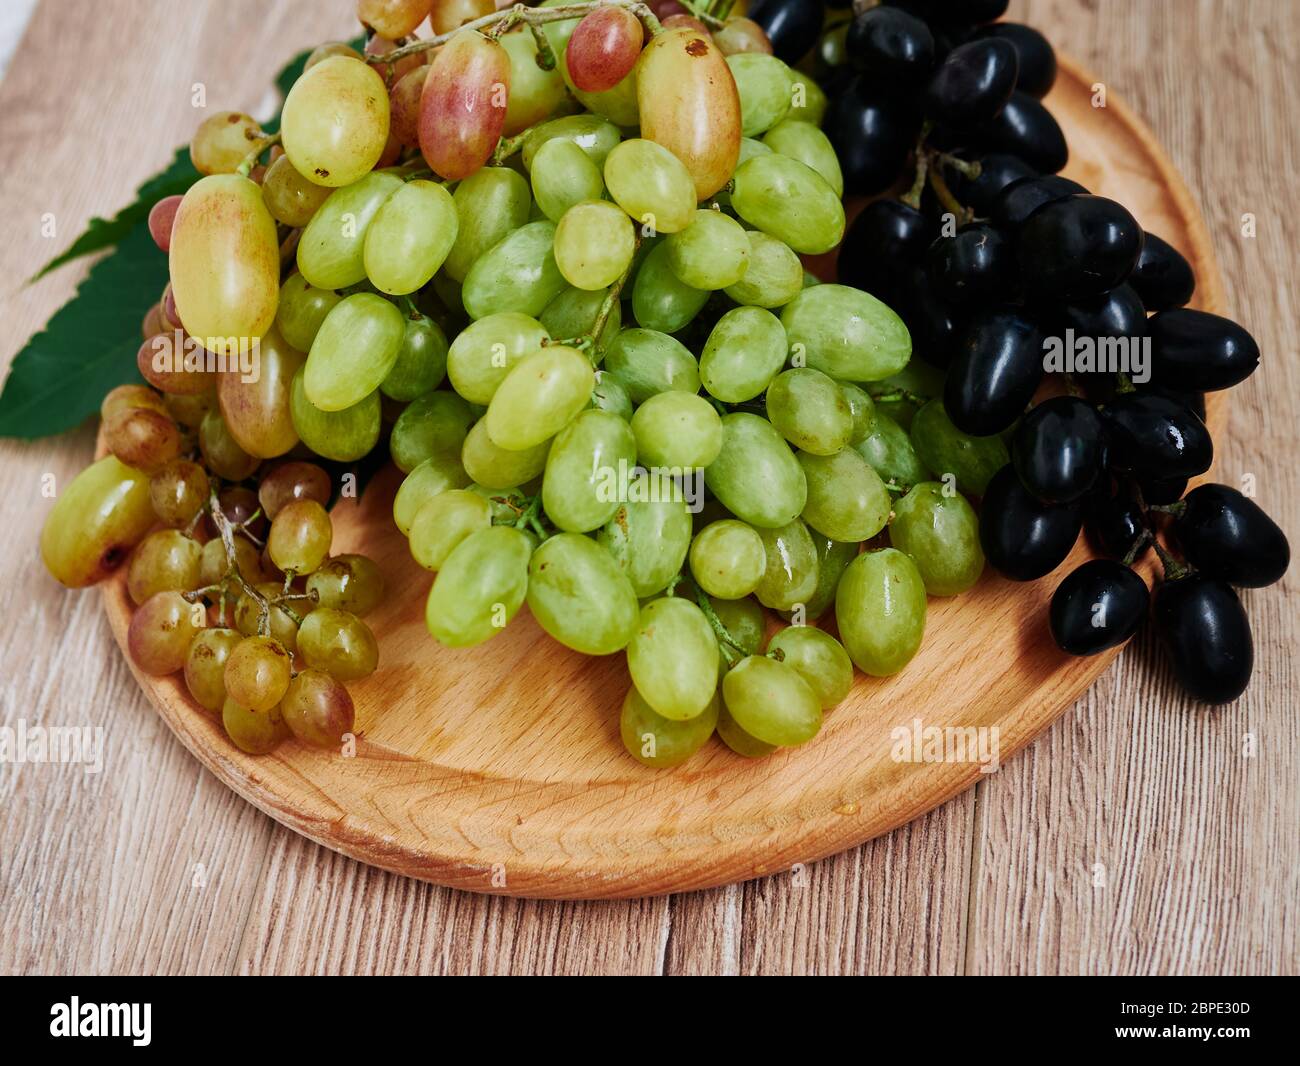 Healthy fruits. Red and green wine grapes on wooden background, dark and green organic wine grapes Stock Photo